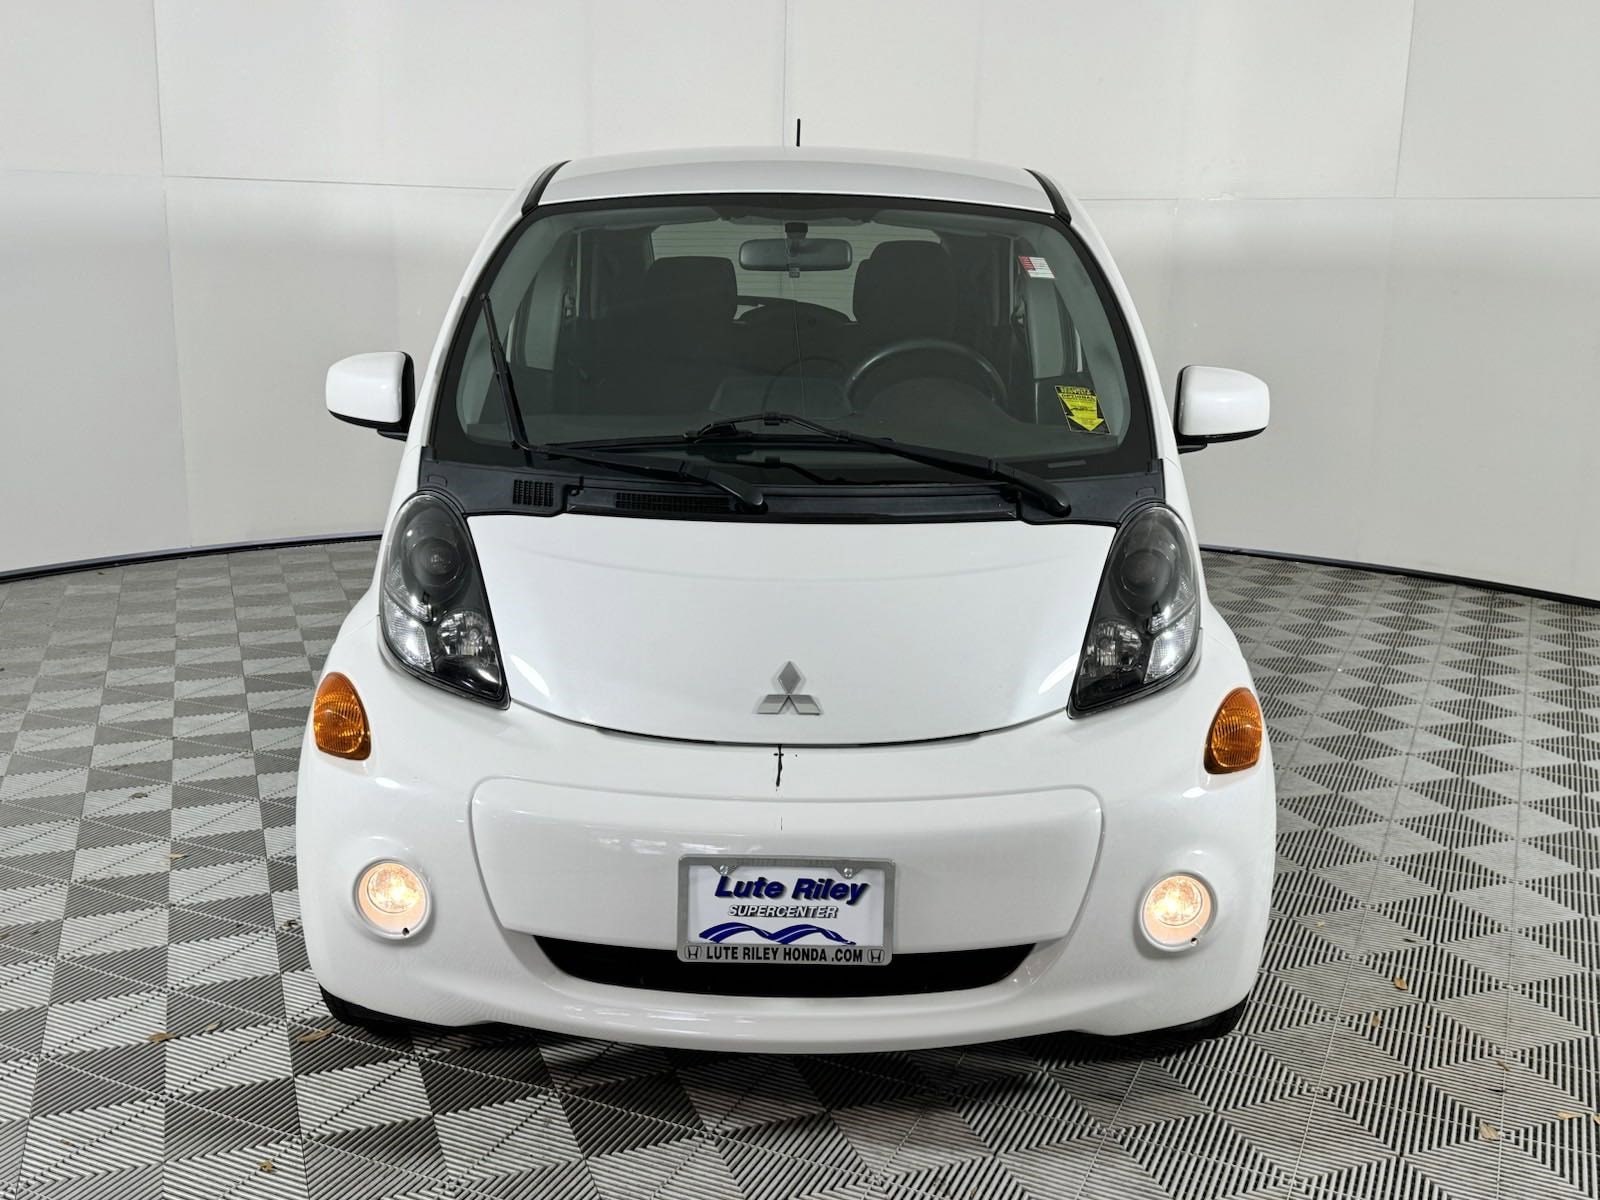 Used 2012 Mitsubishi i-MiEV ES with VIN JA3215H1XCU022356 for sale in Richardson, TX